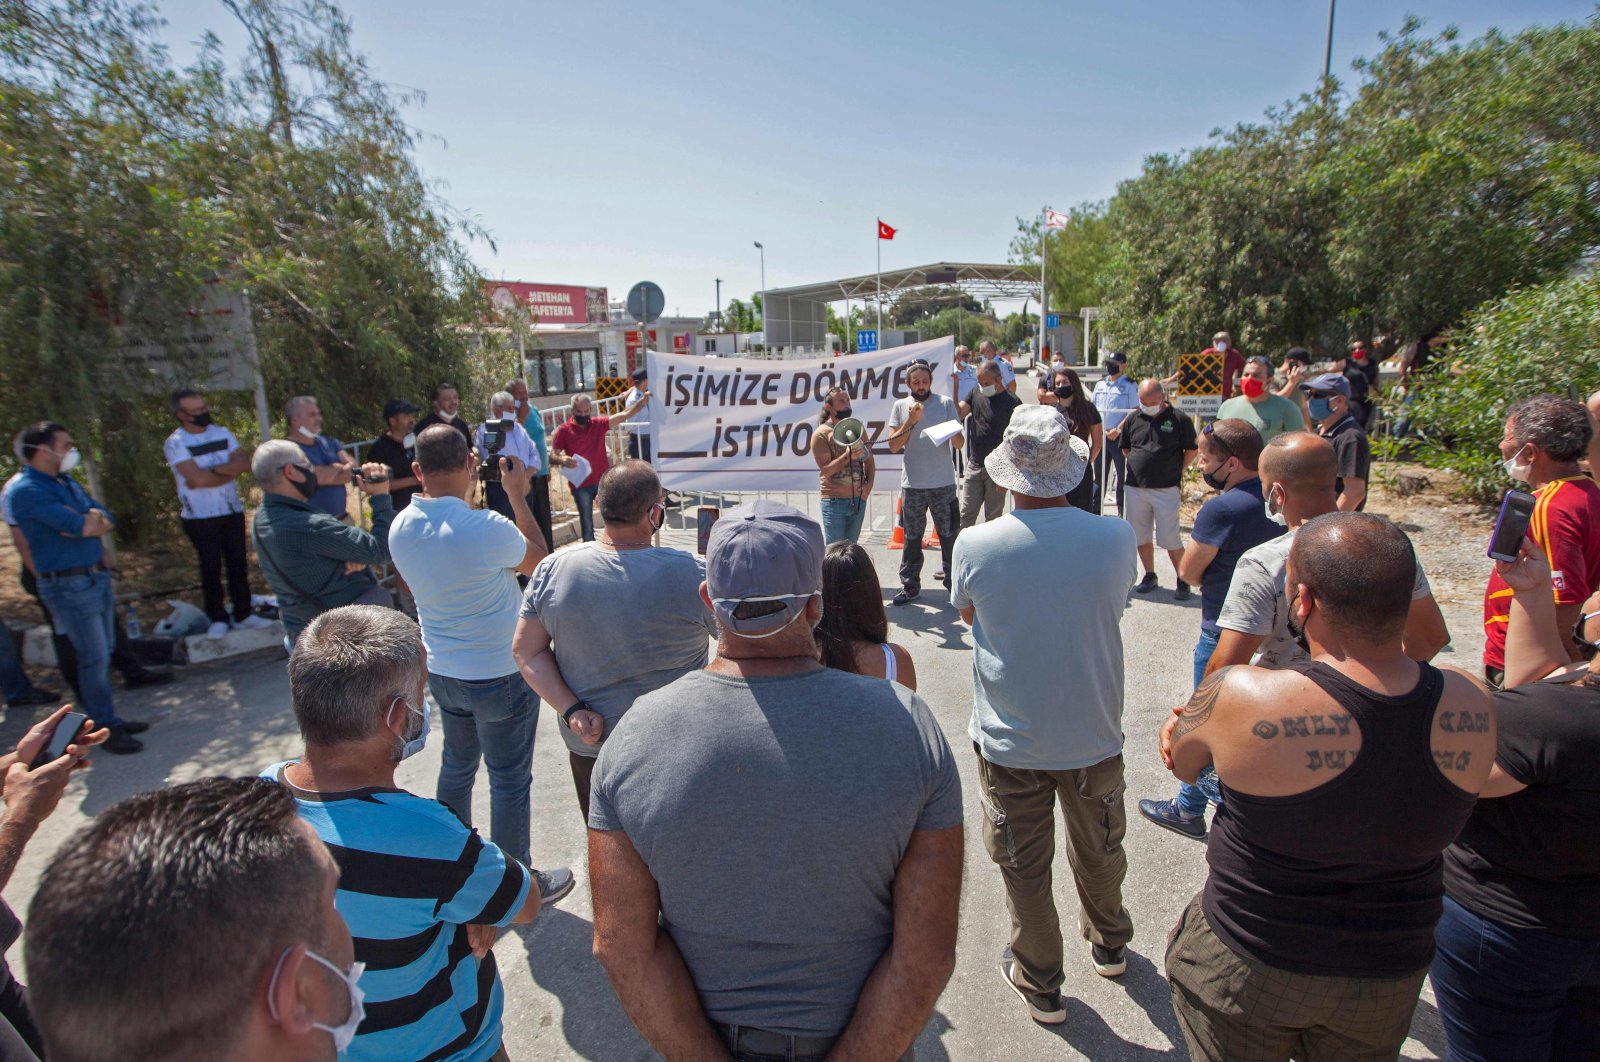 Turkish Cypriots living in the north are protesting the Greek Cypriot administration's closure of border gates as part of efforts to stop the spread of the coronavirus at the Ayios Dhometios crossing, May 15, 2020  (AFP Photo)